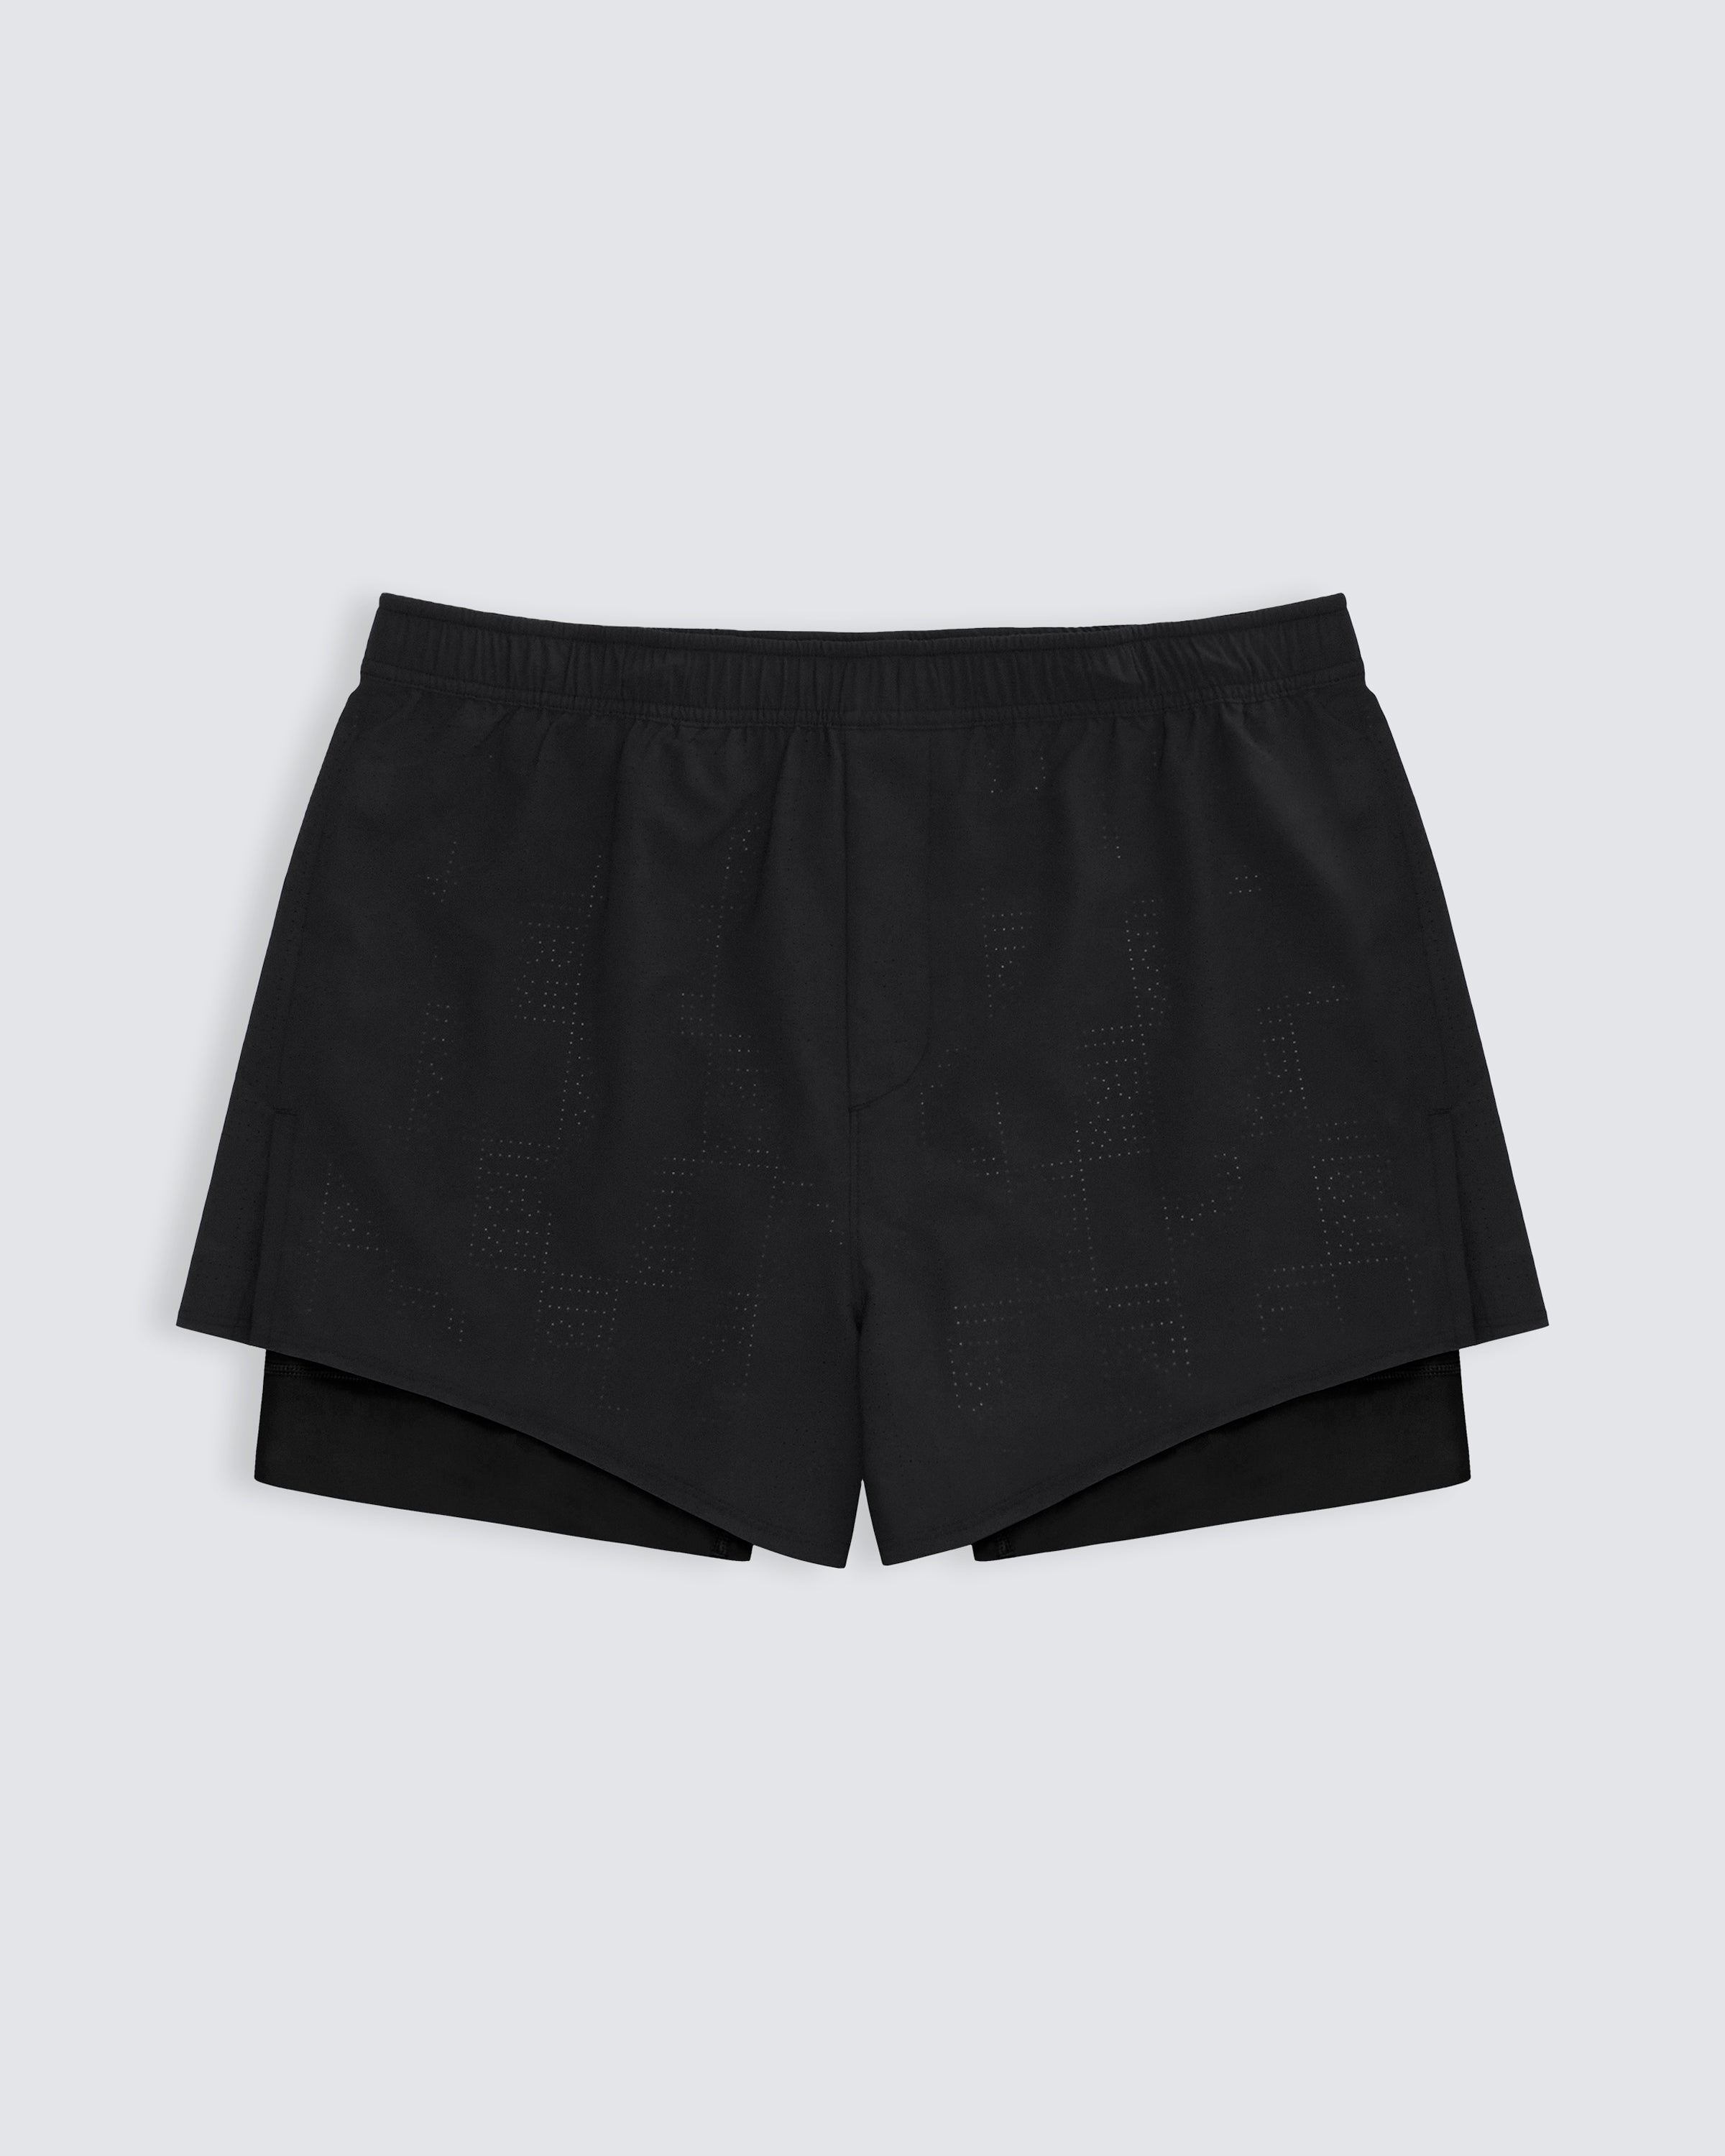 Mens perforated lined short in black